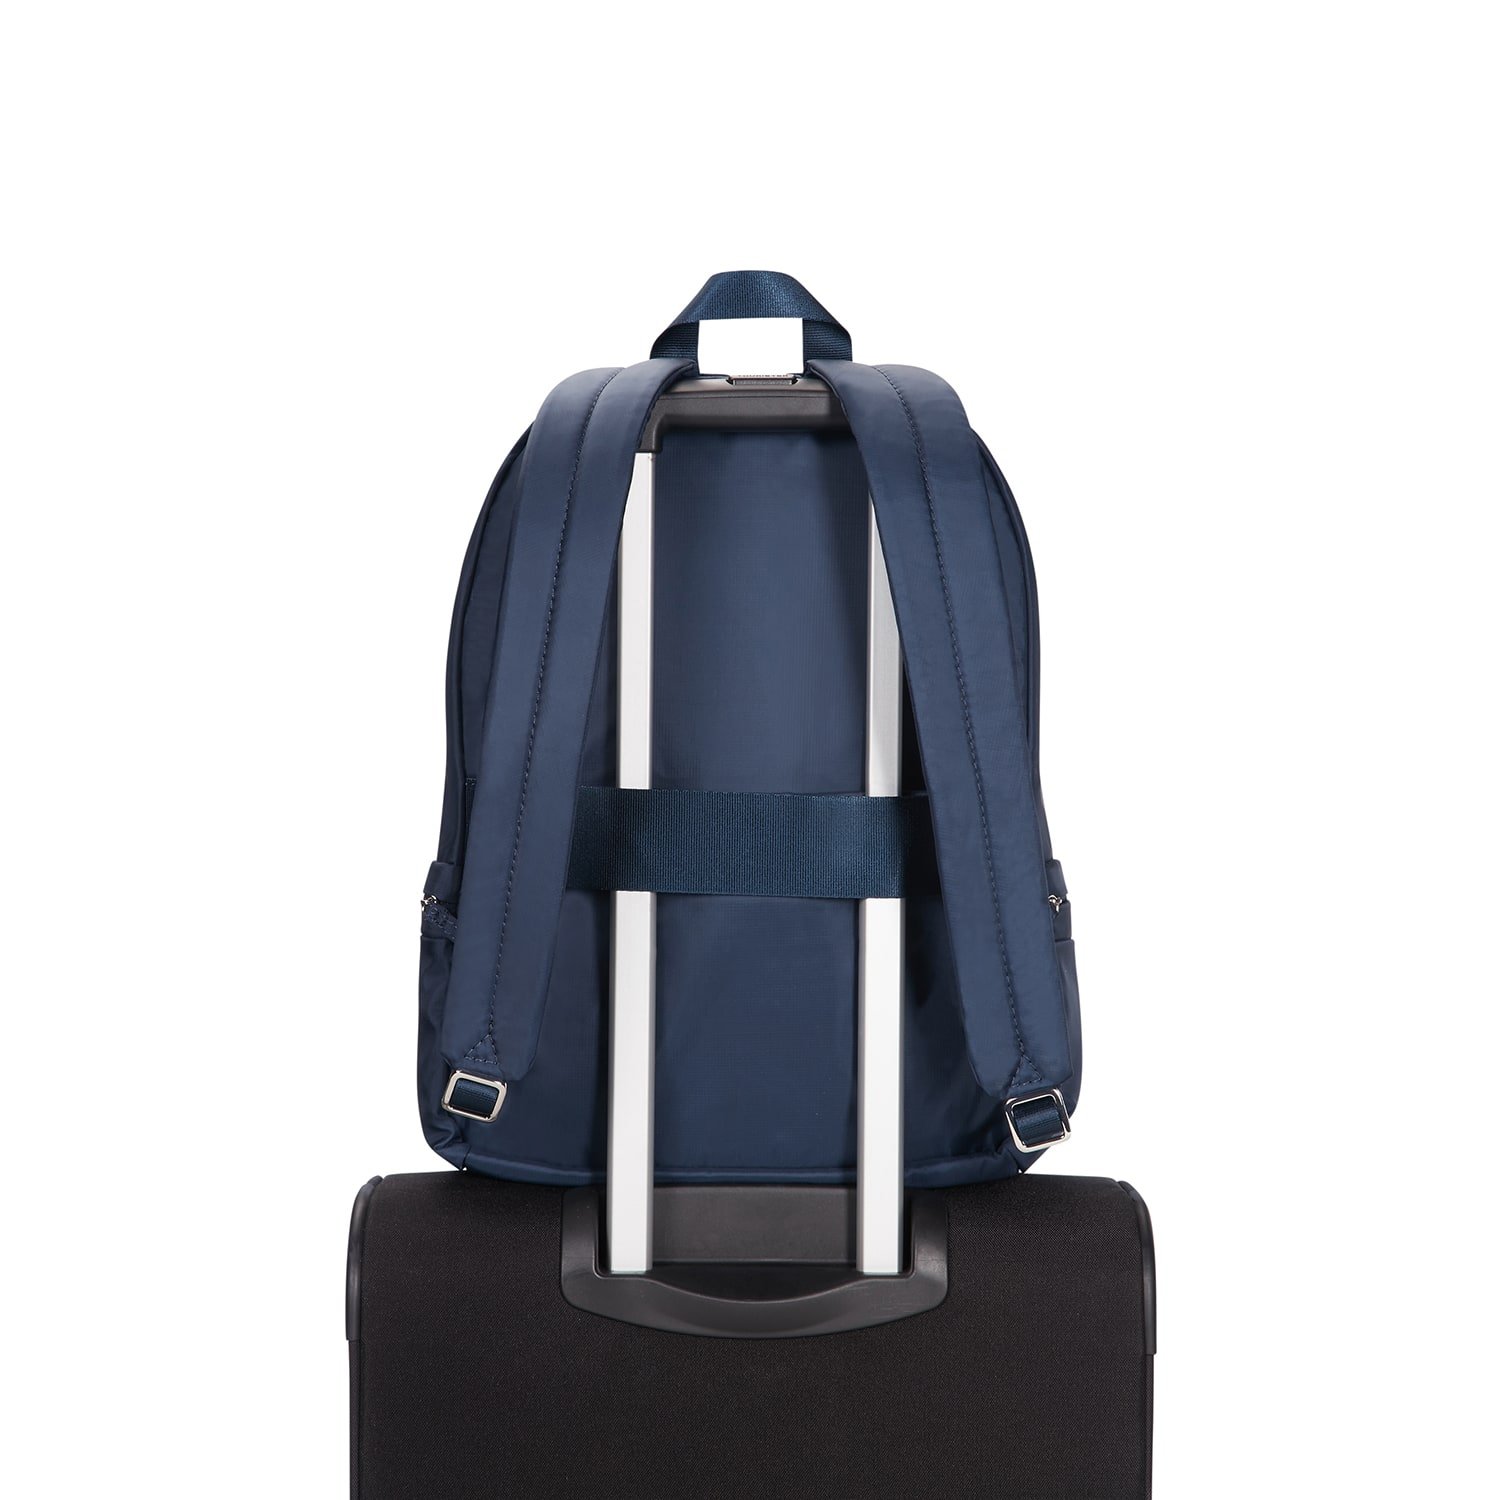 MOVE 2.0-BACKPACK 14.1" S88D-011-SF000*01